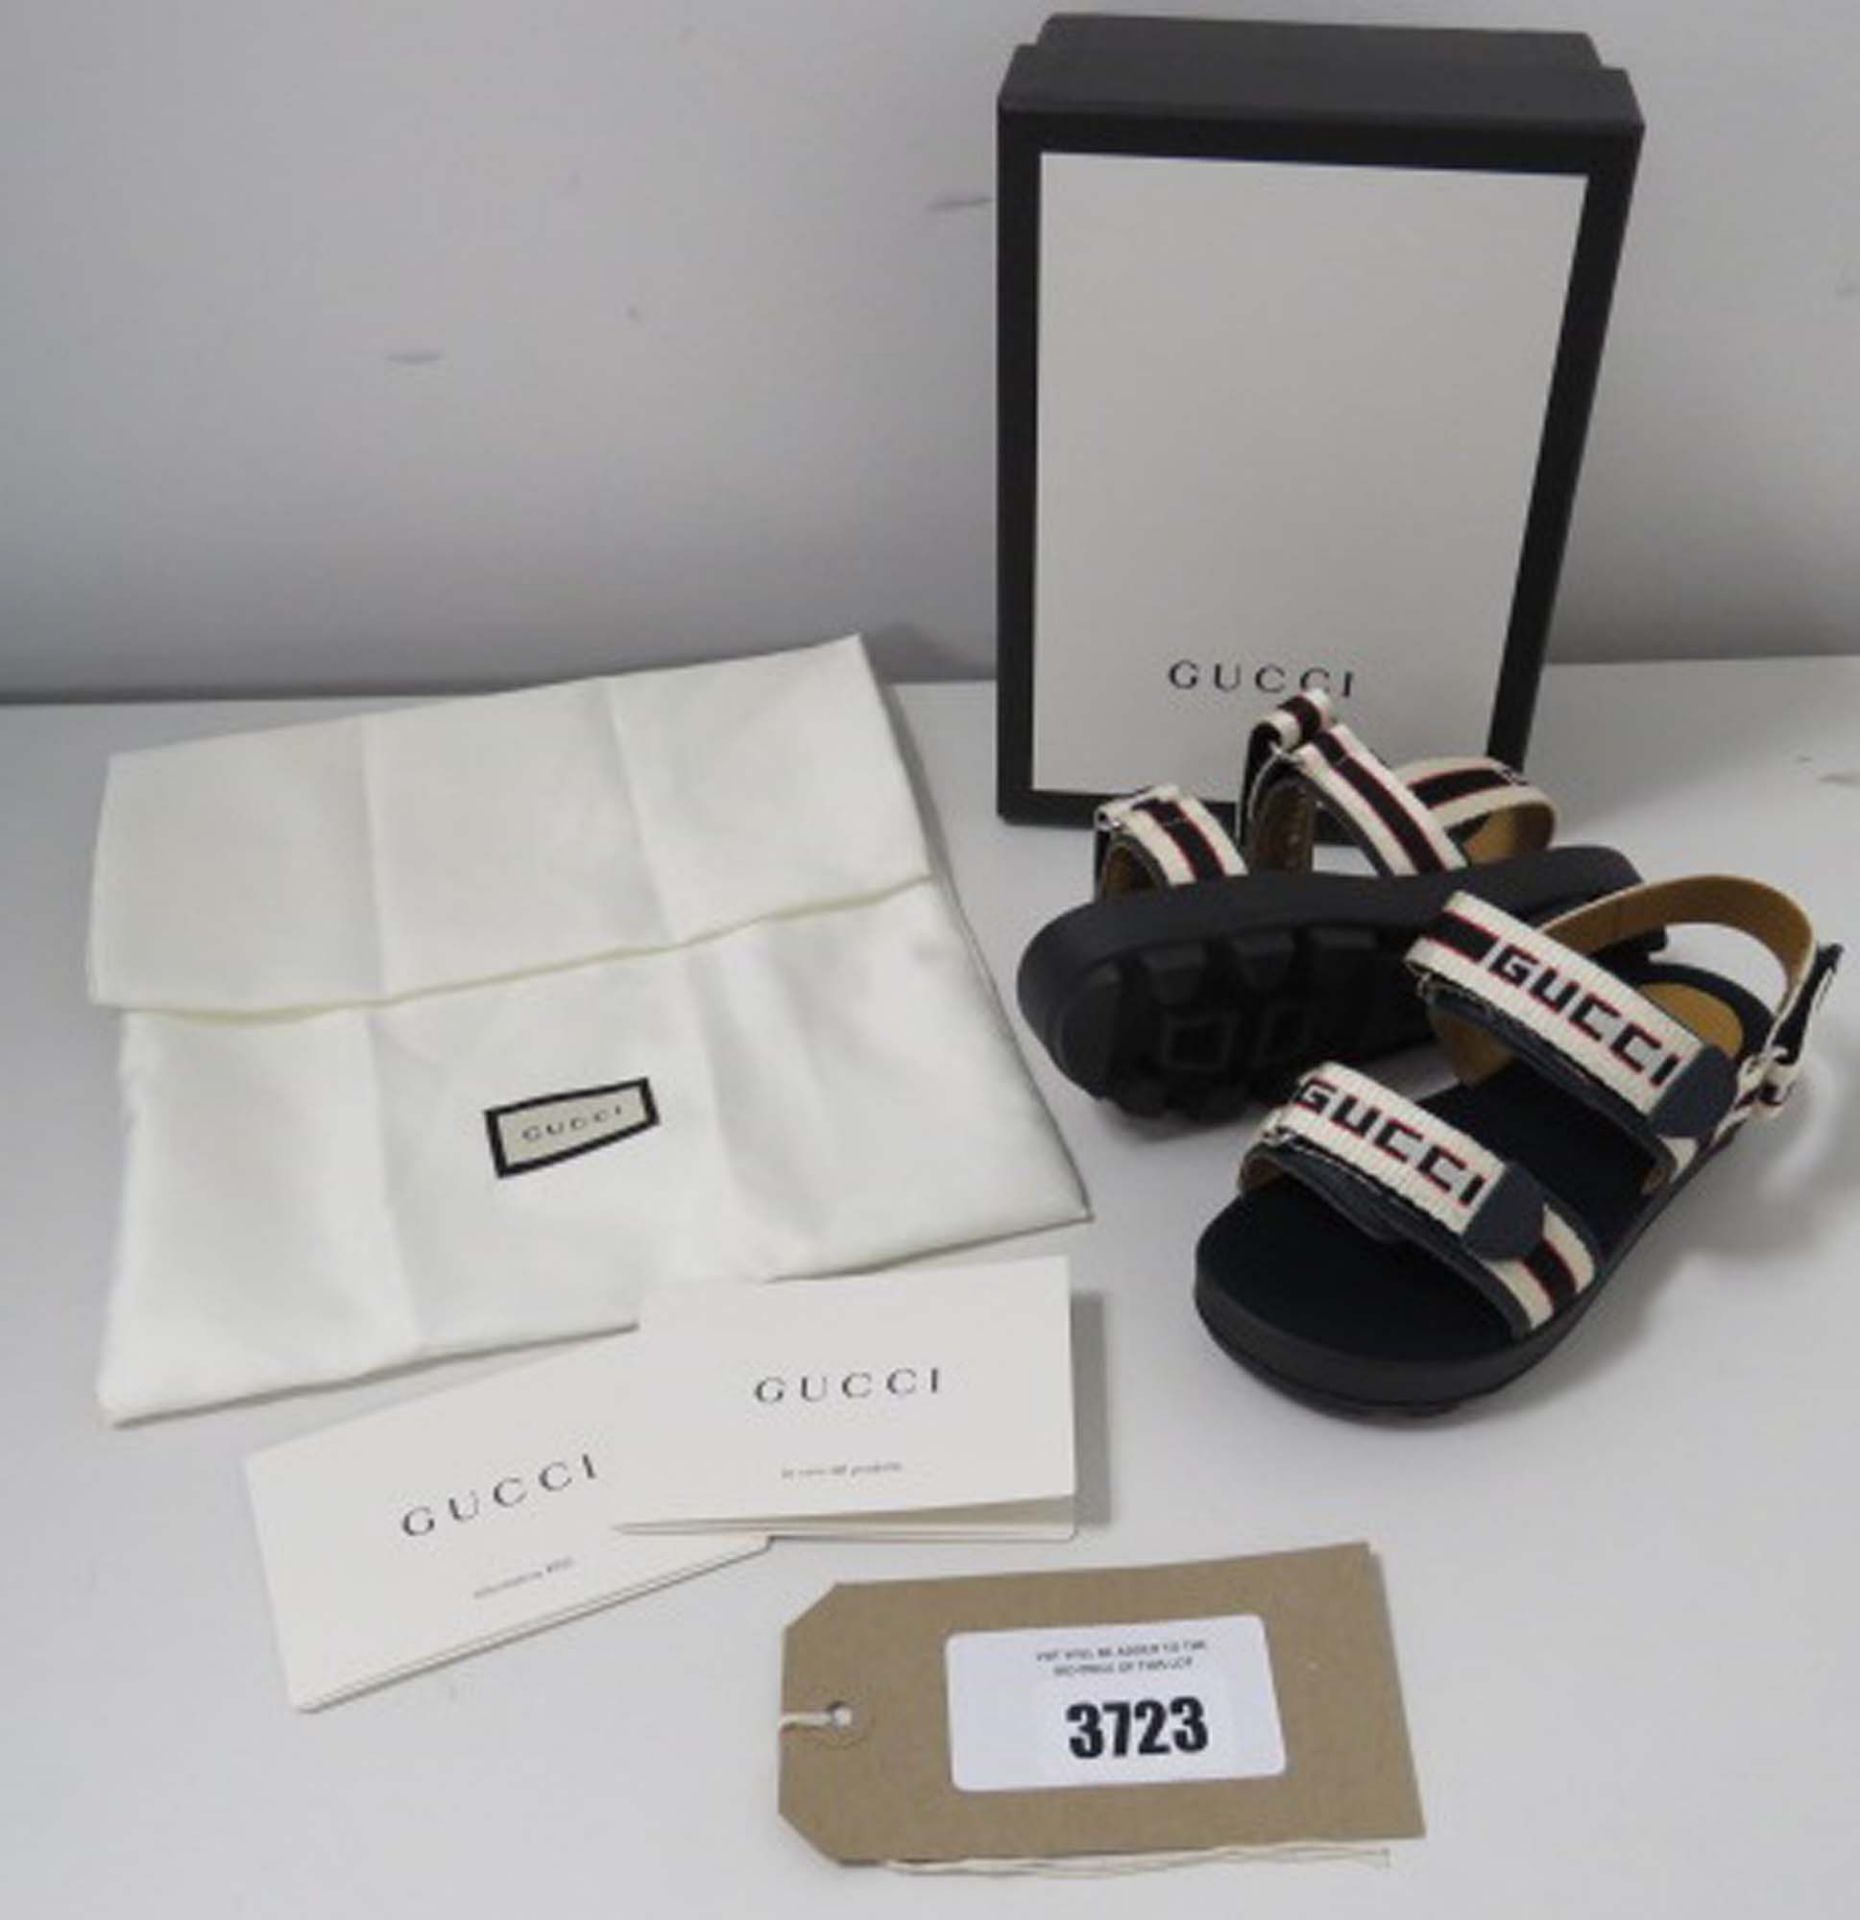 Gucci children's ivory and navy logo sandals size UK8.5